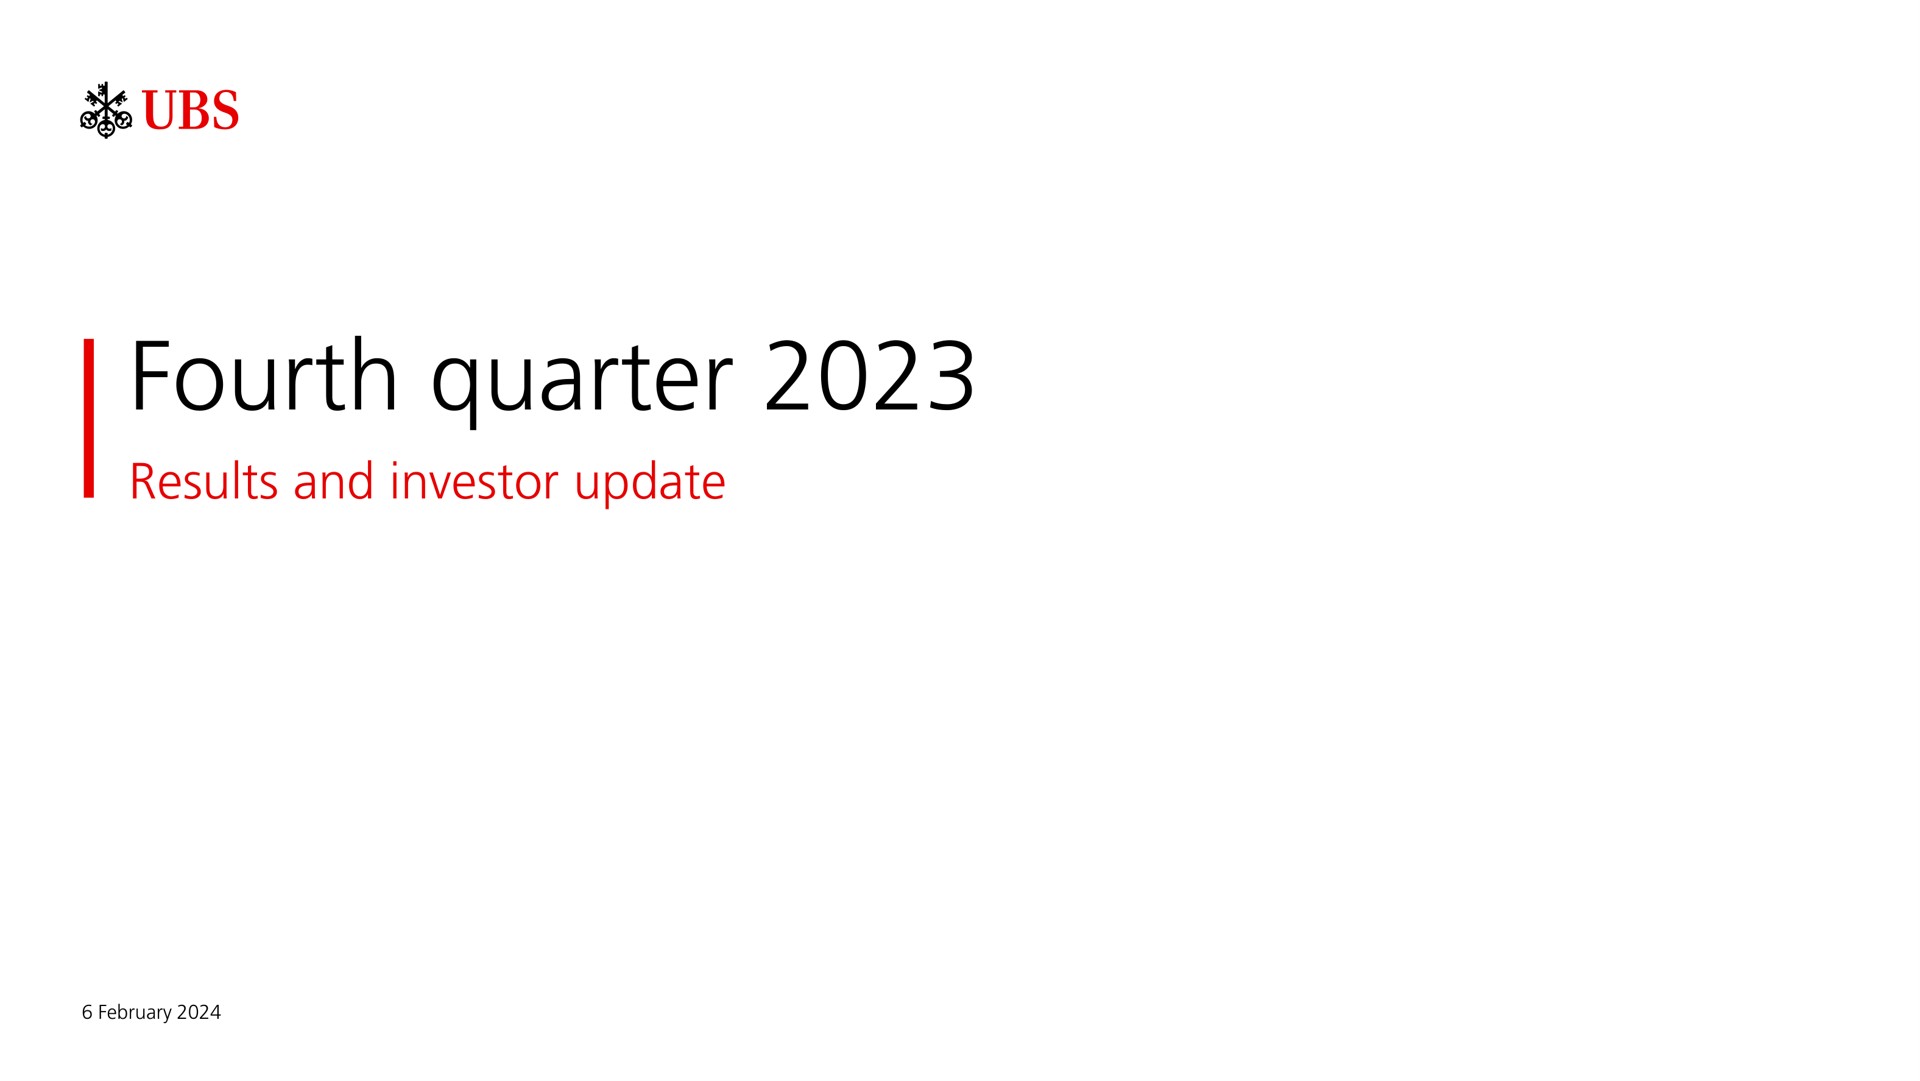 fourth quarter results and investor update | UBS